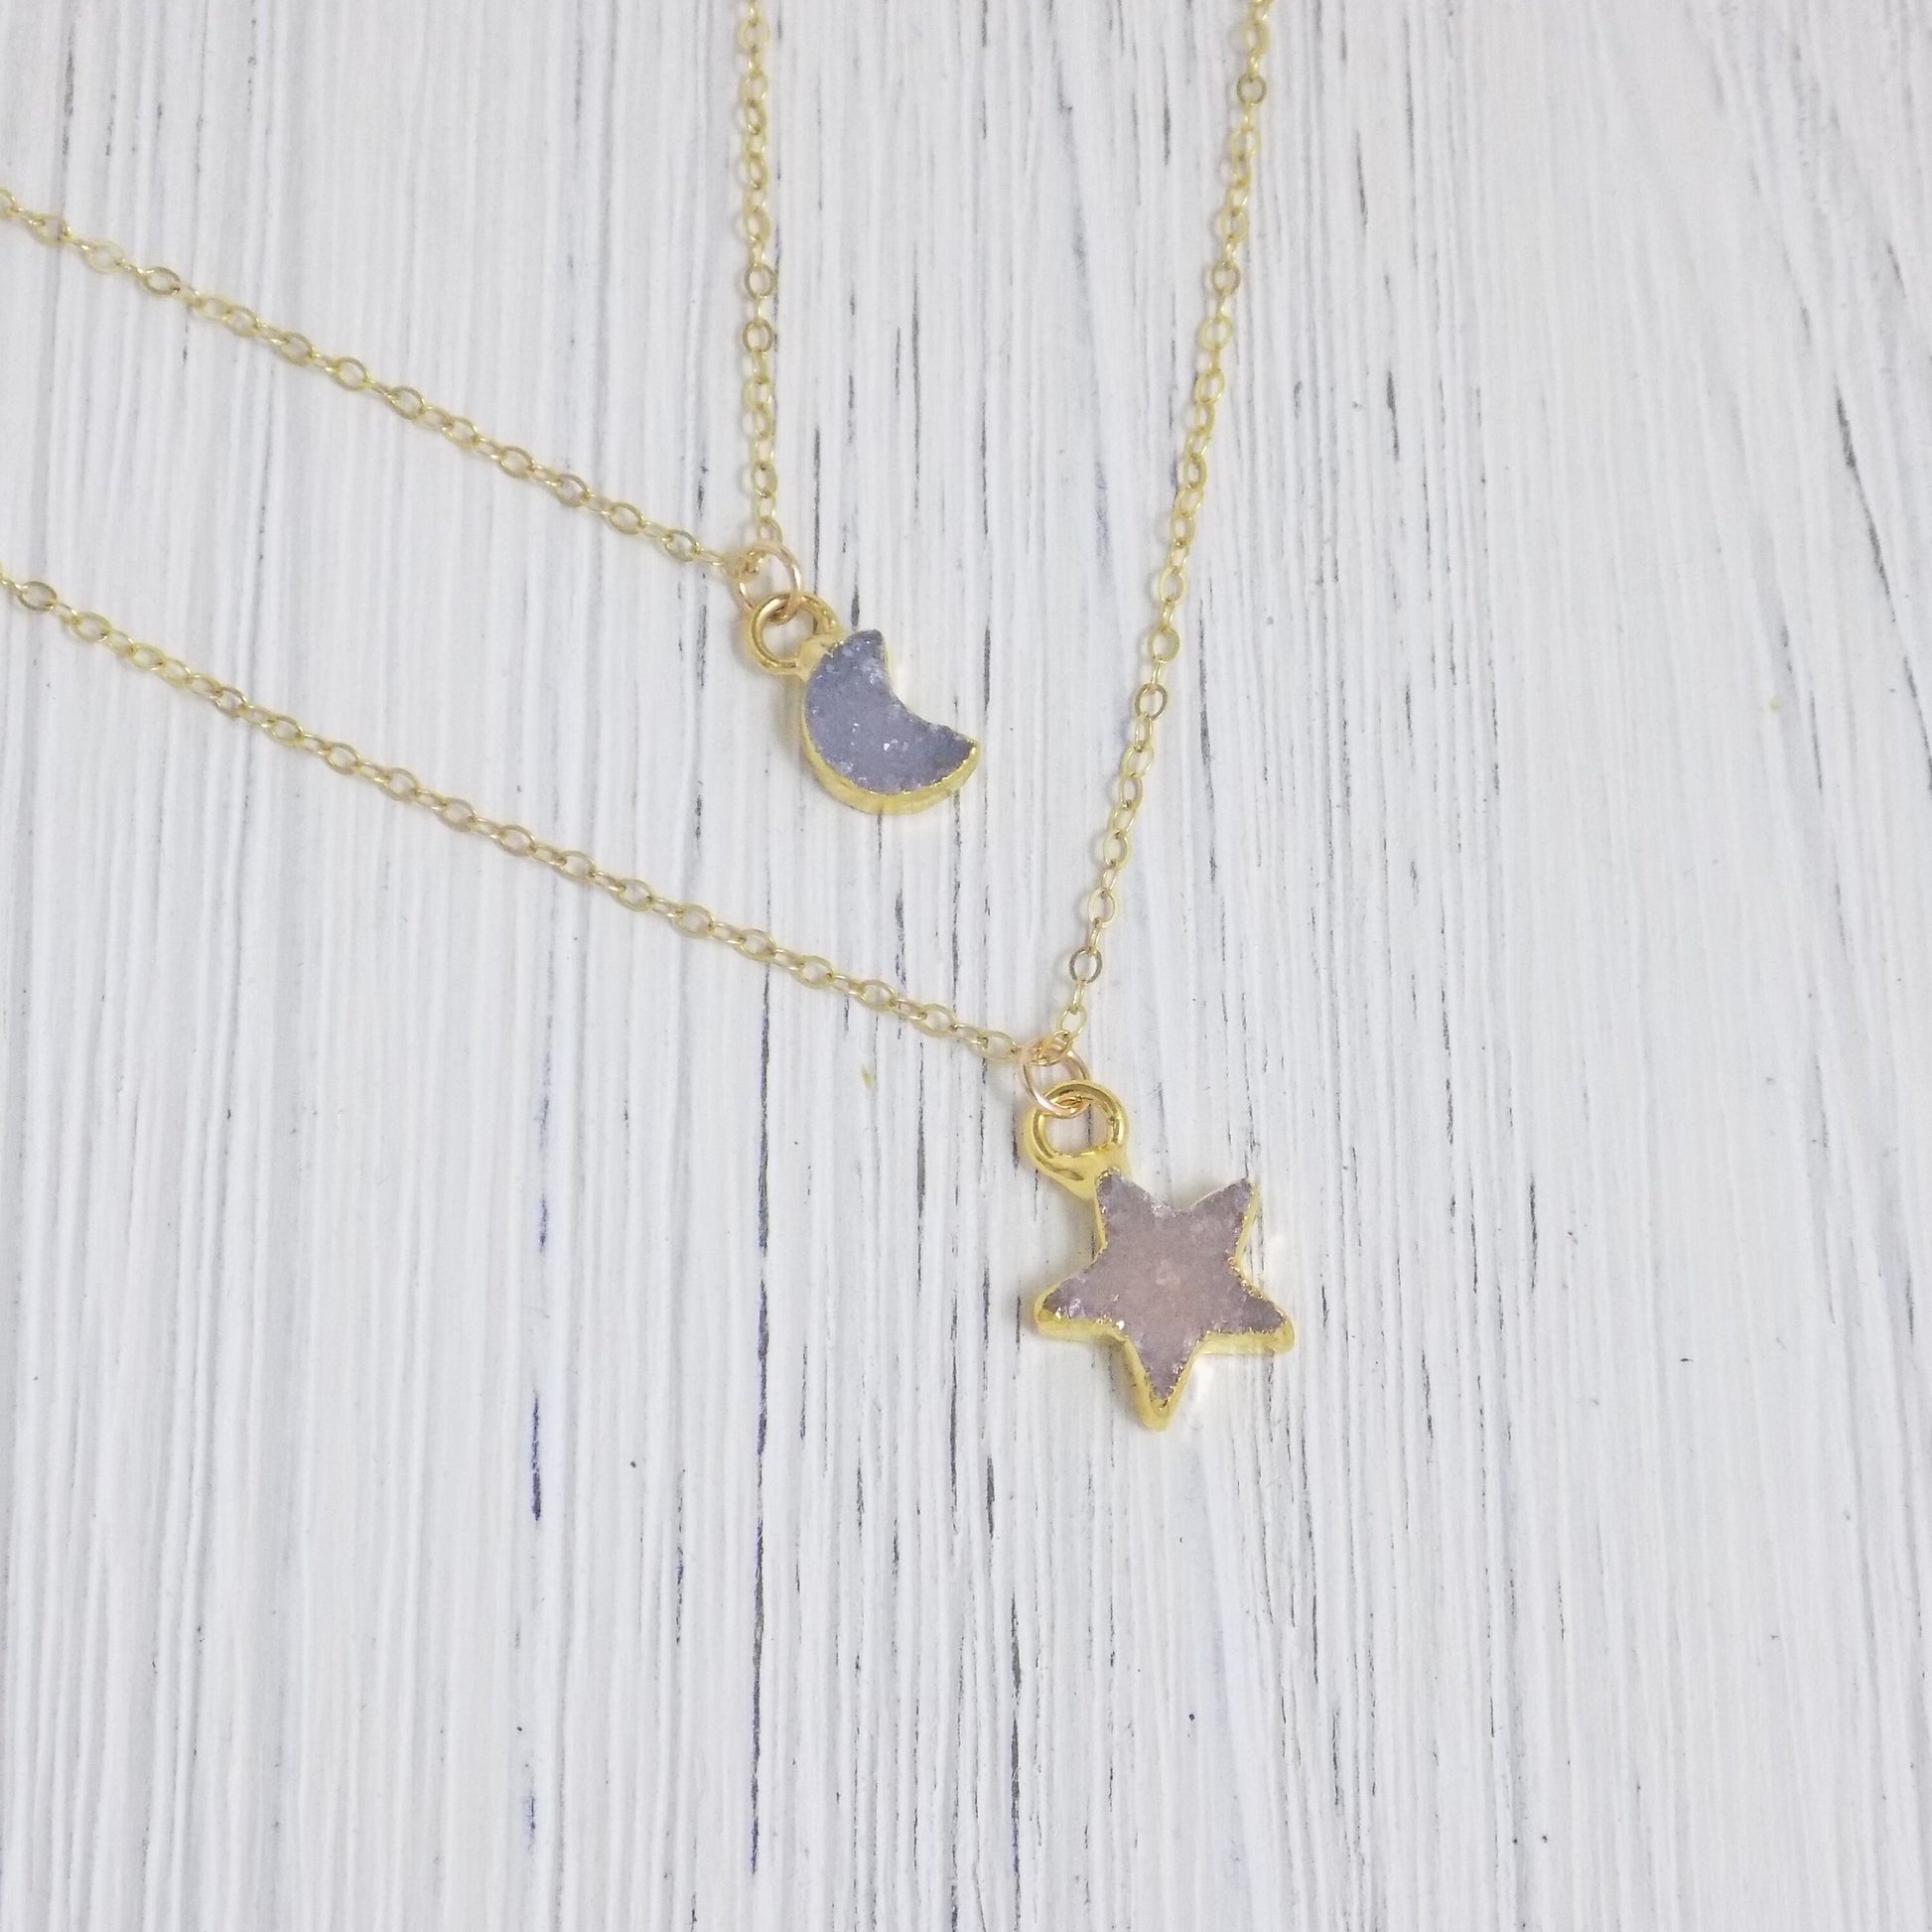 Tiny Moon and Star Druzy Necklaces on Gold Filled Chain - Celestial Jewelry